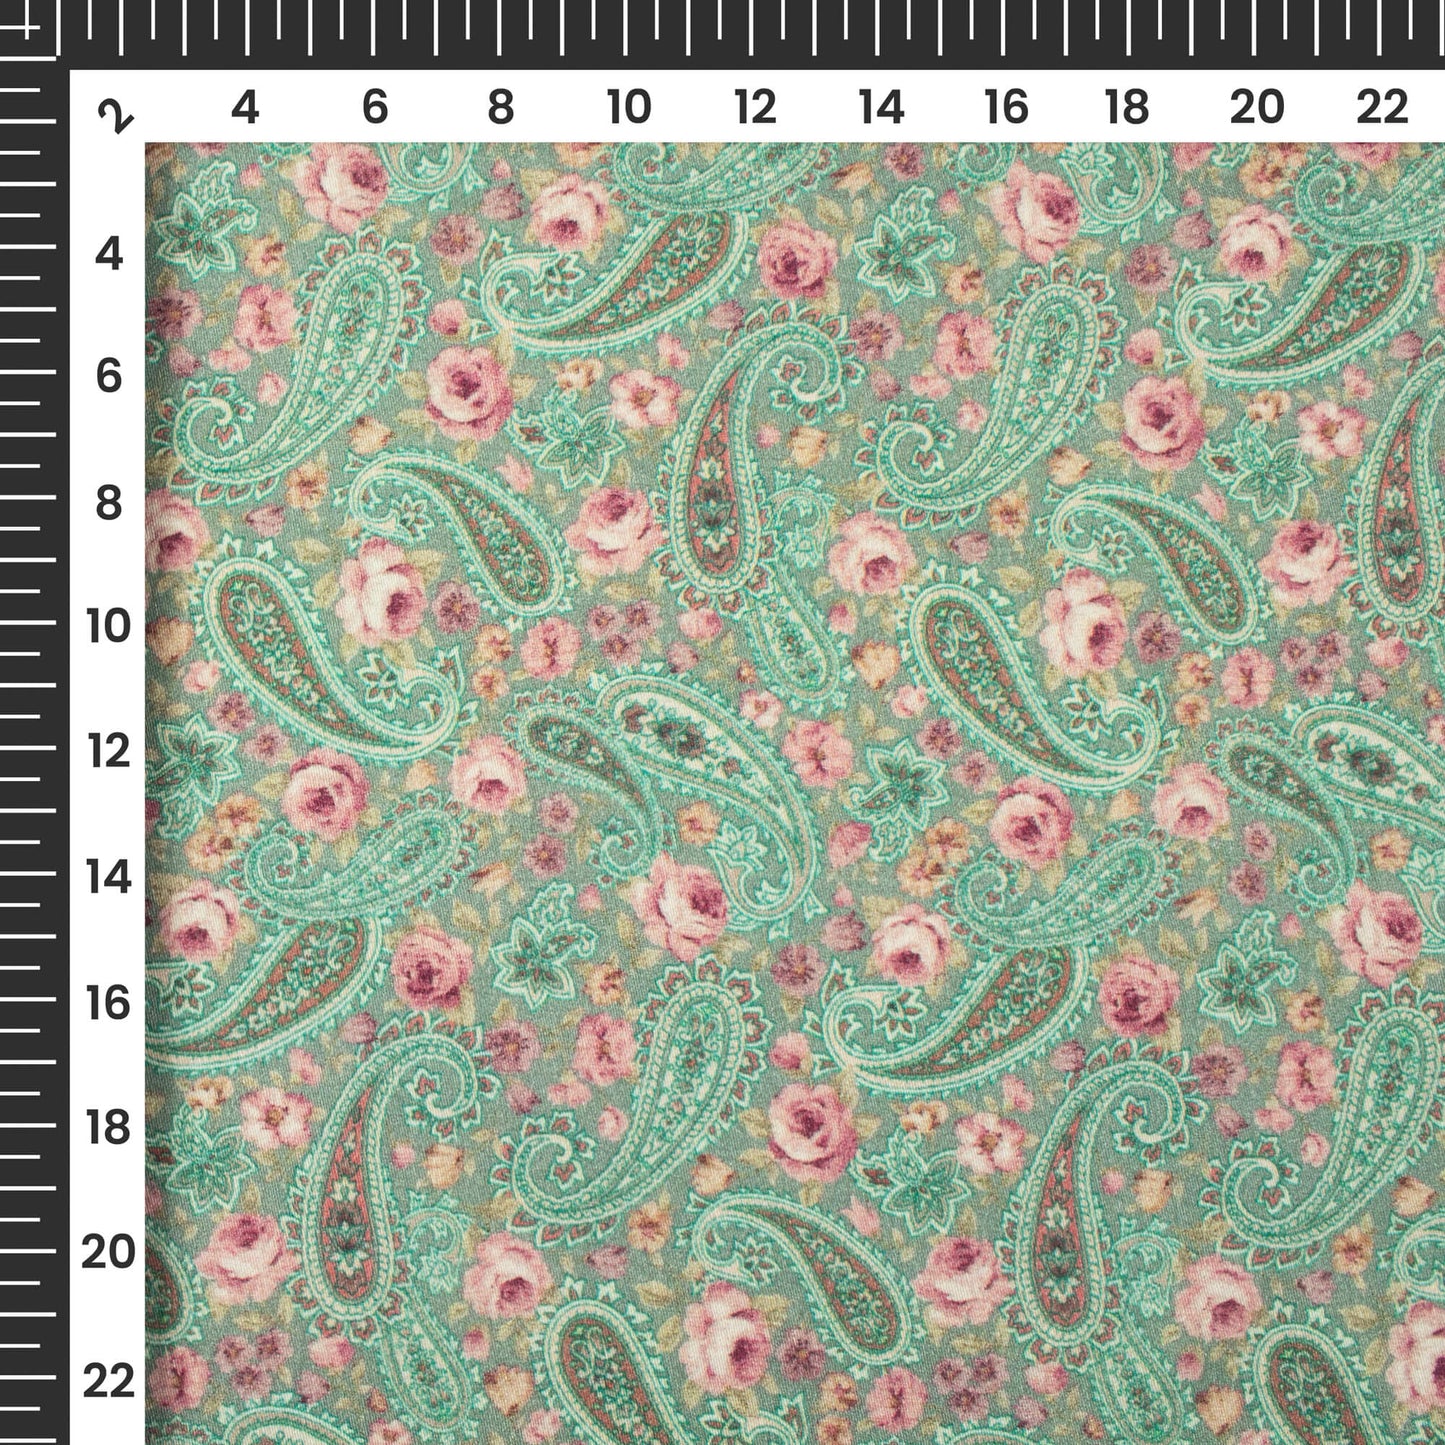 Turquoise Blue And Pink Paisley Digital Print Viscose Rayon Fabric(Width 58 Inches)